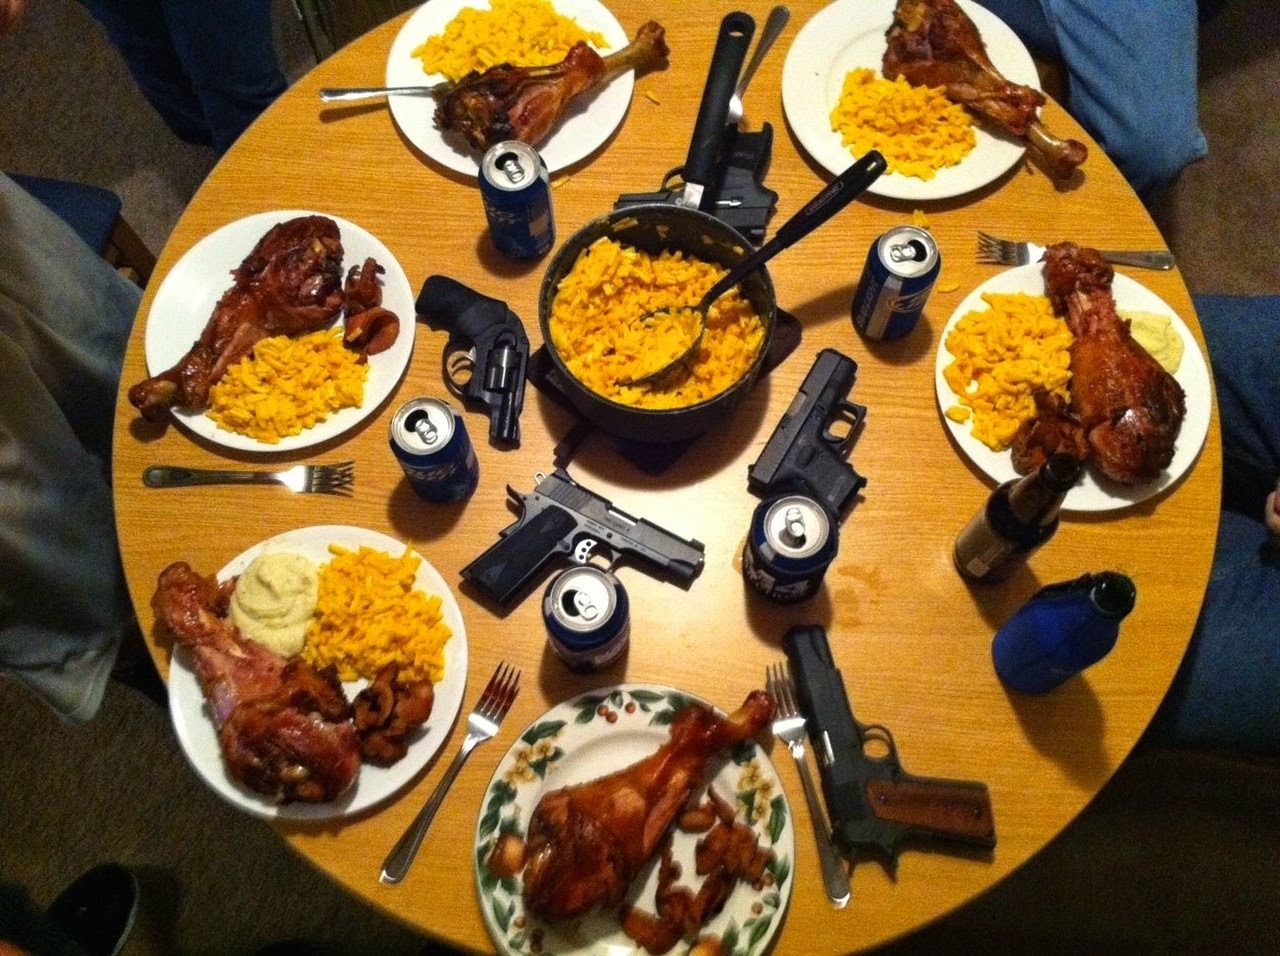 round table with manly drumsticks and a gun on each plate.